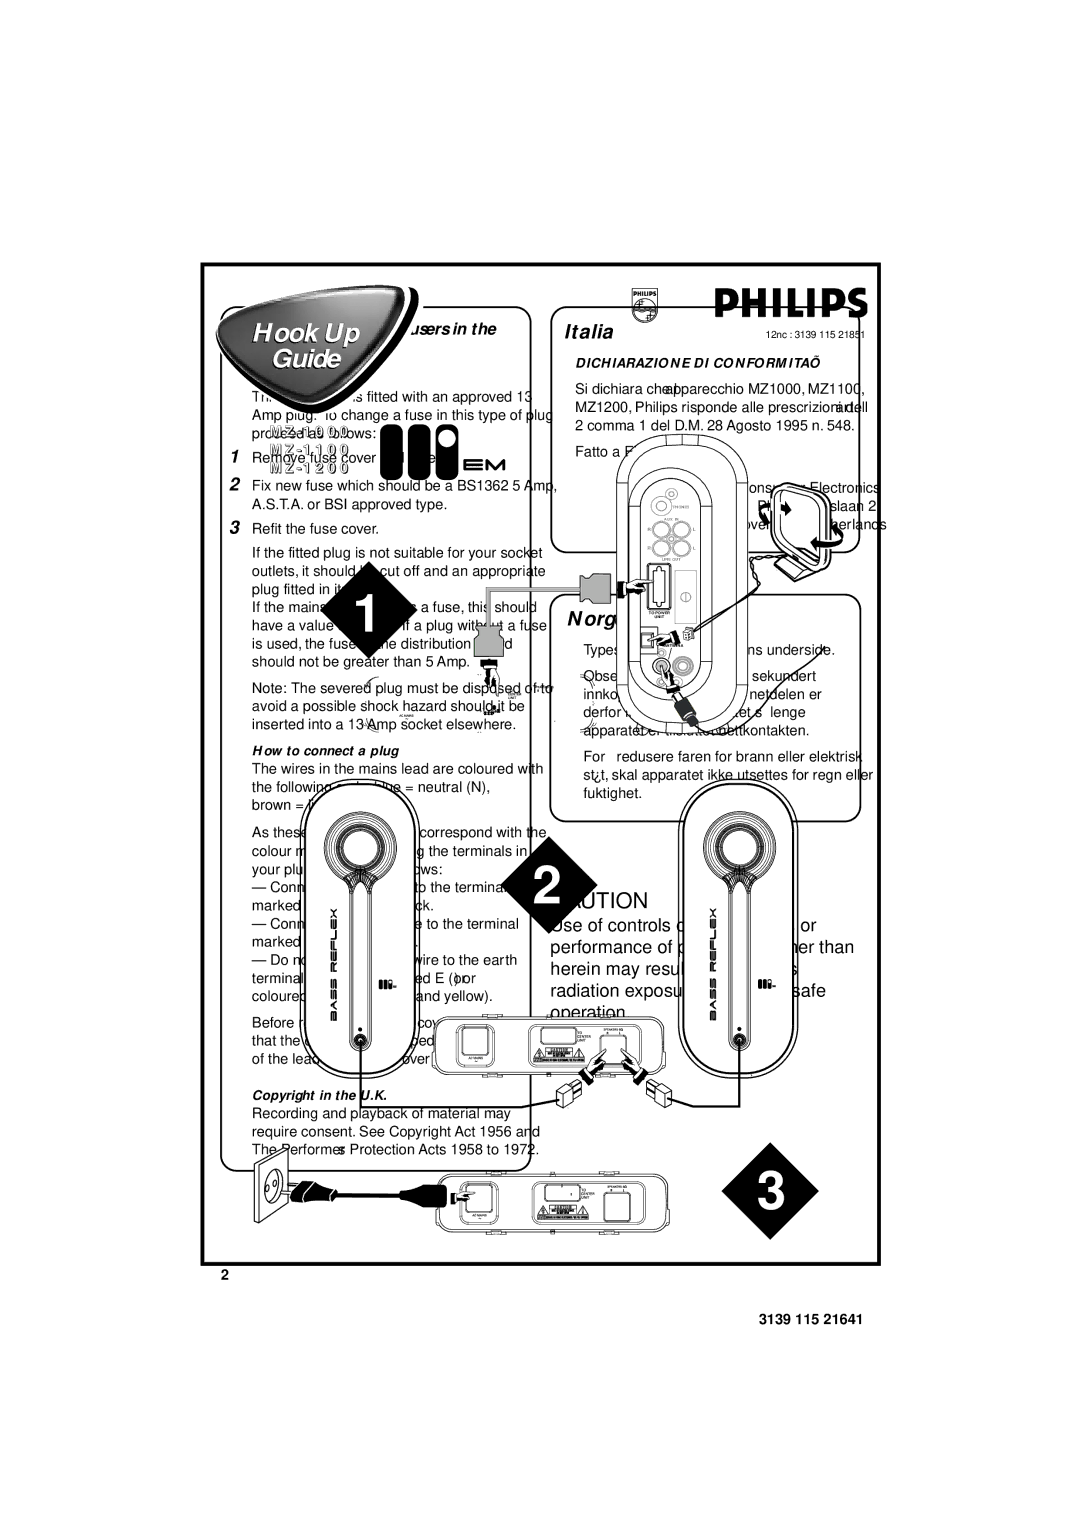 Philips MZ1100, MZ1000 manual Important notes for users in the U.K, Mains plug, How to connect a plug, Copyright in the U.K 